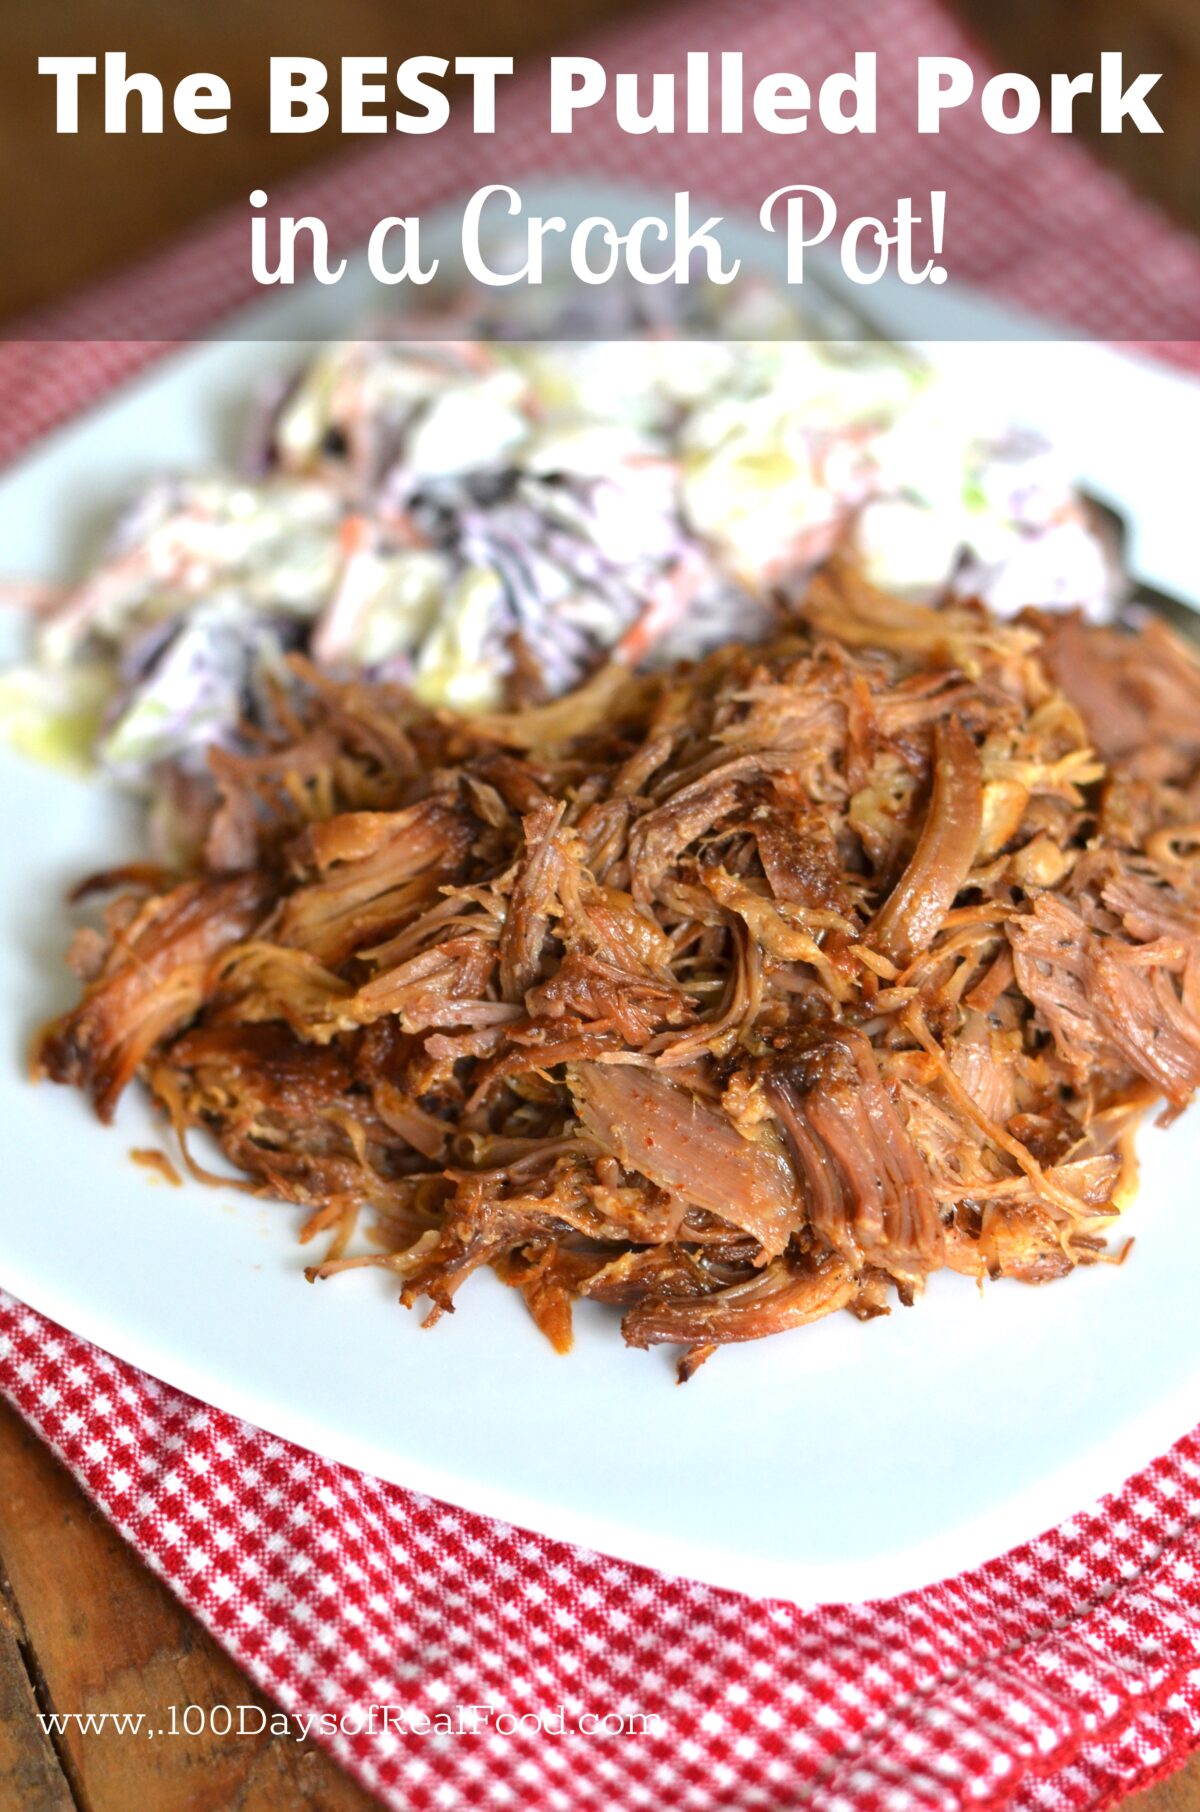 Homemade pulled pork on a plate with a side of coleslaw sitting on red and white napkin.